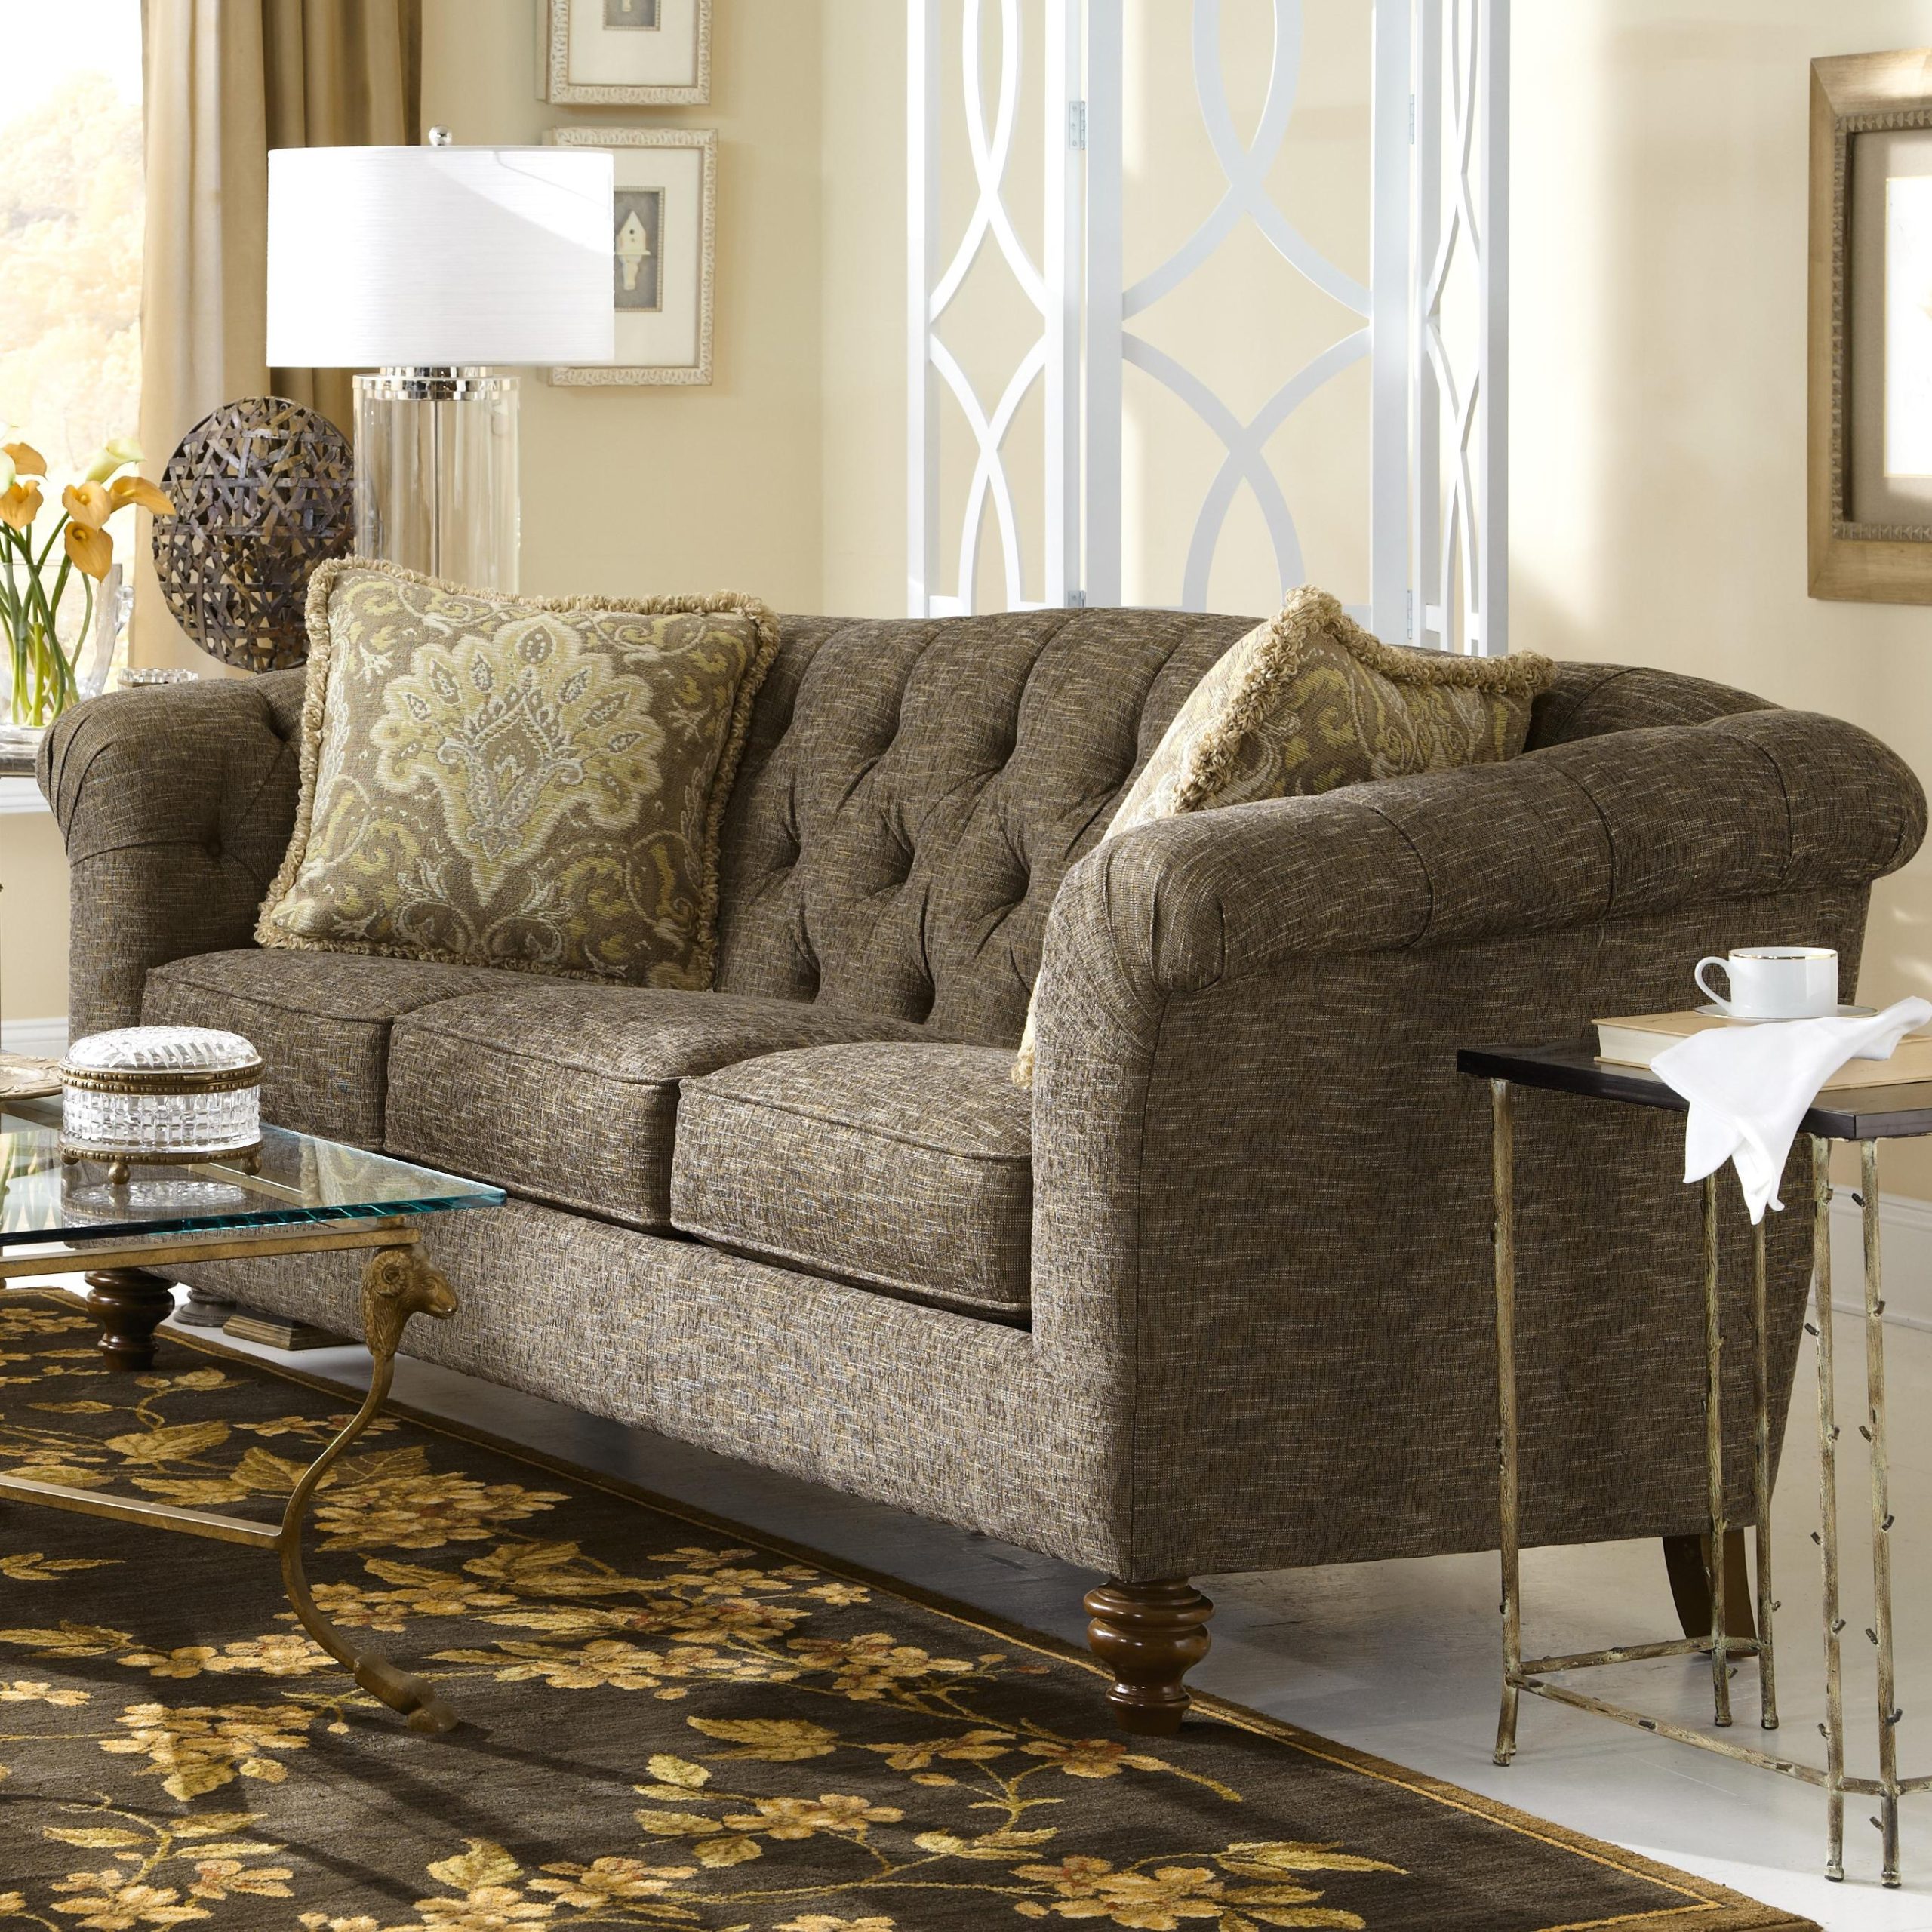 Tufted Couches.